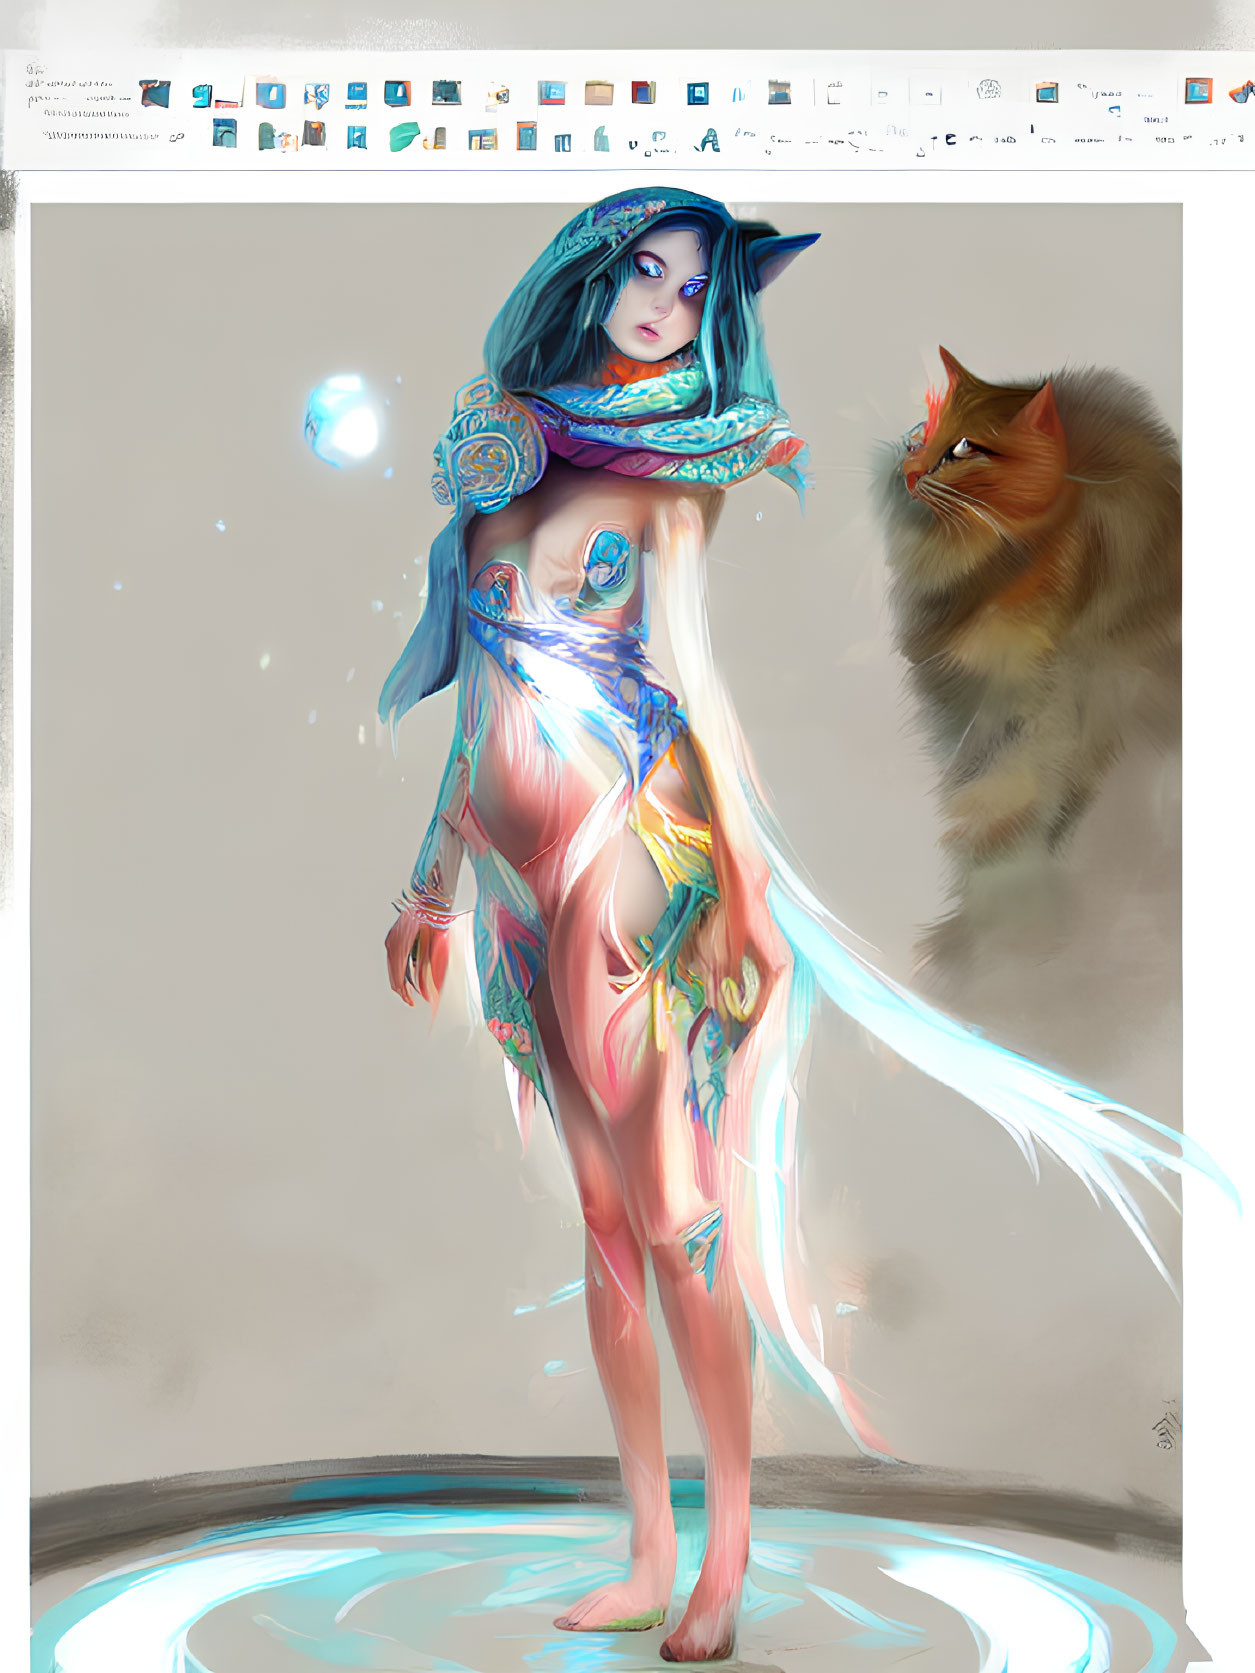 Mystical female figure in blue and gold attire with glowing tattoos next to orange-furred cat